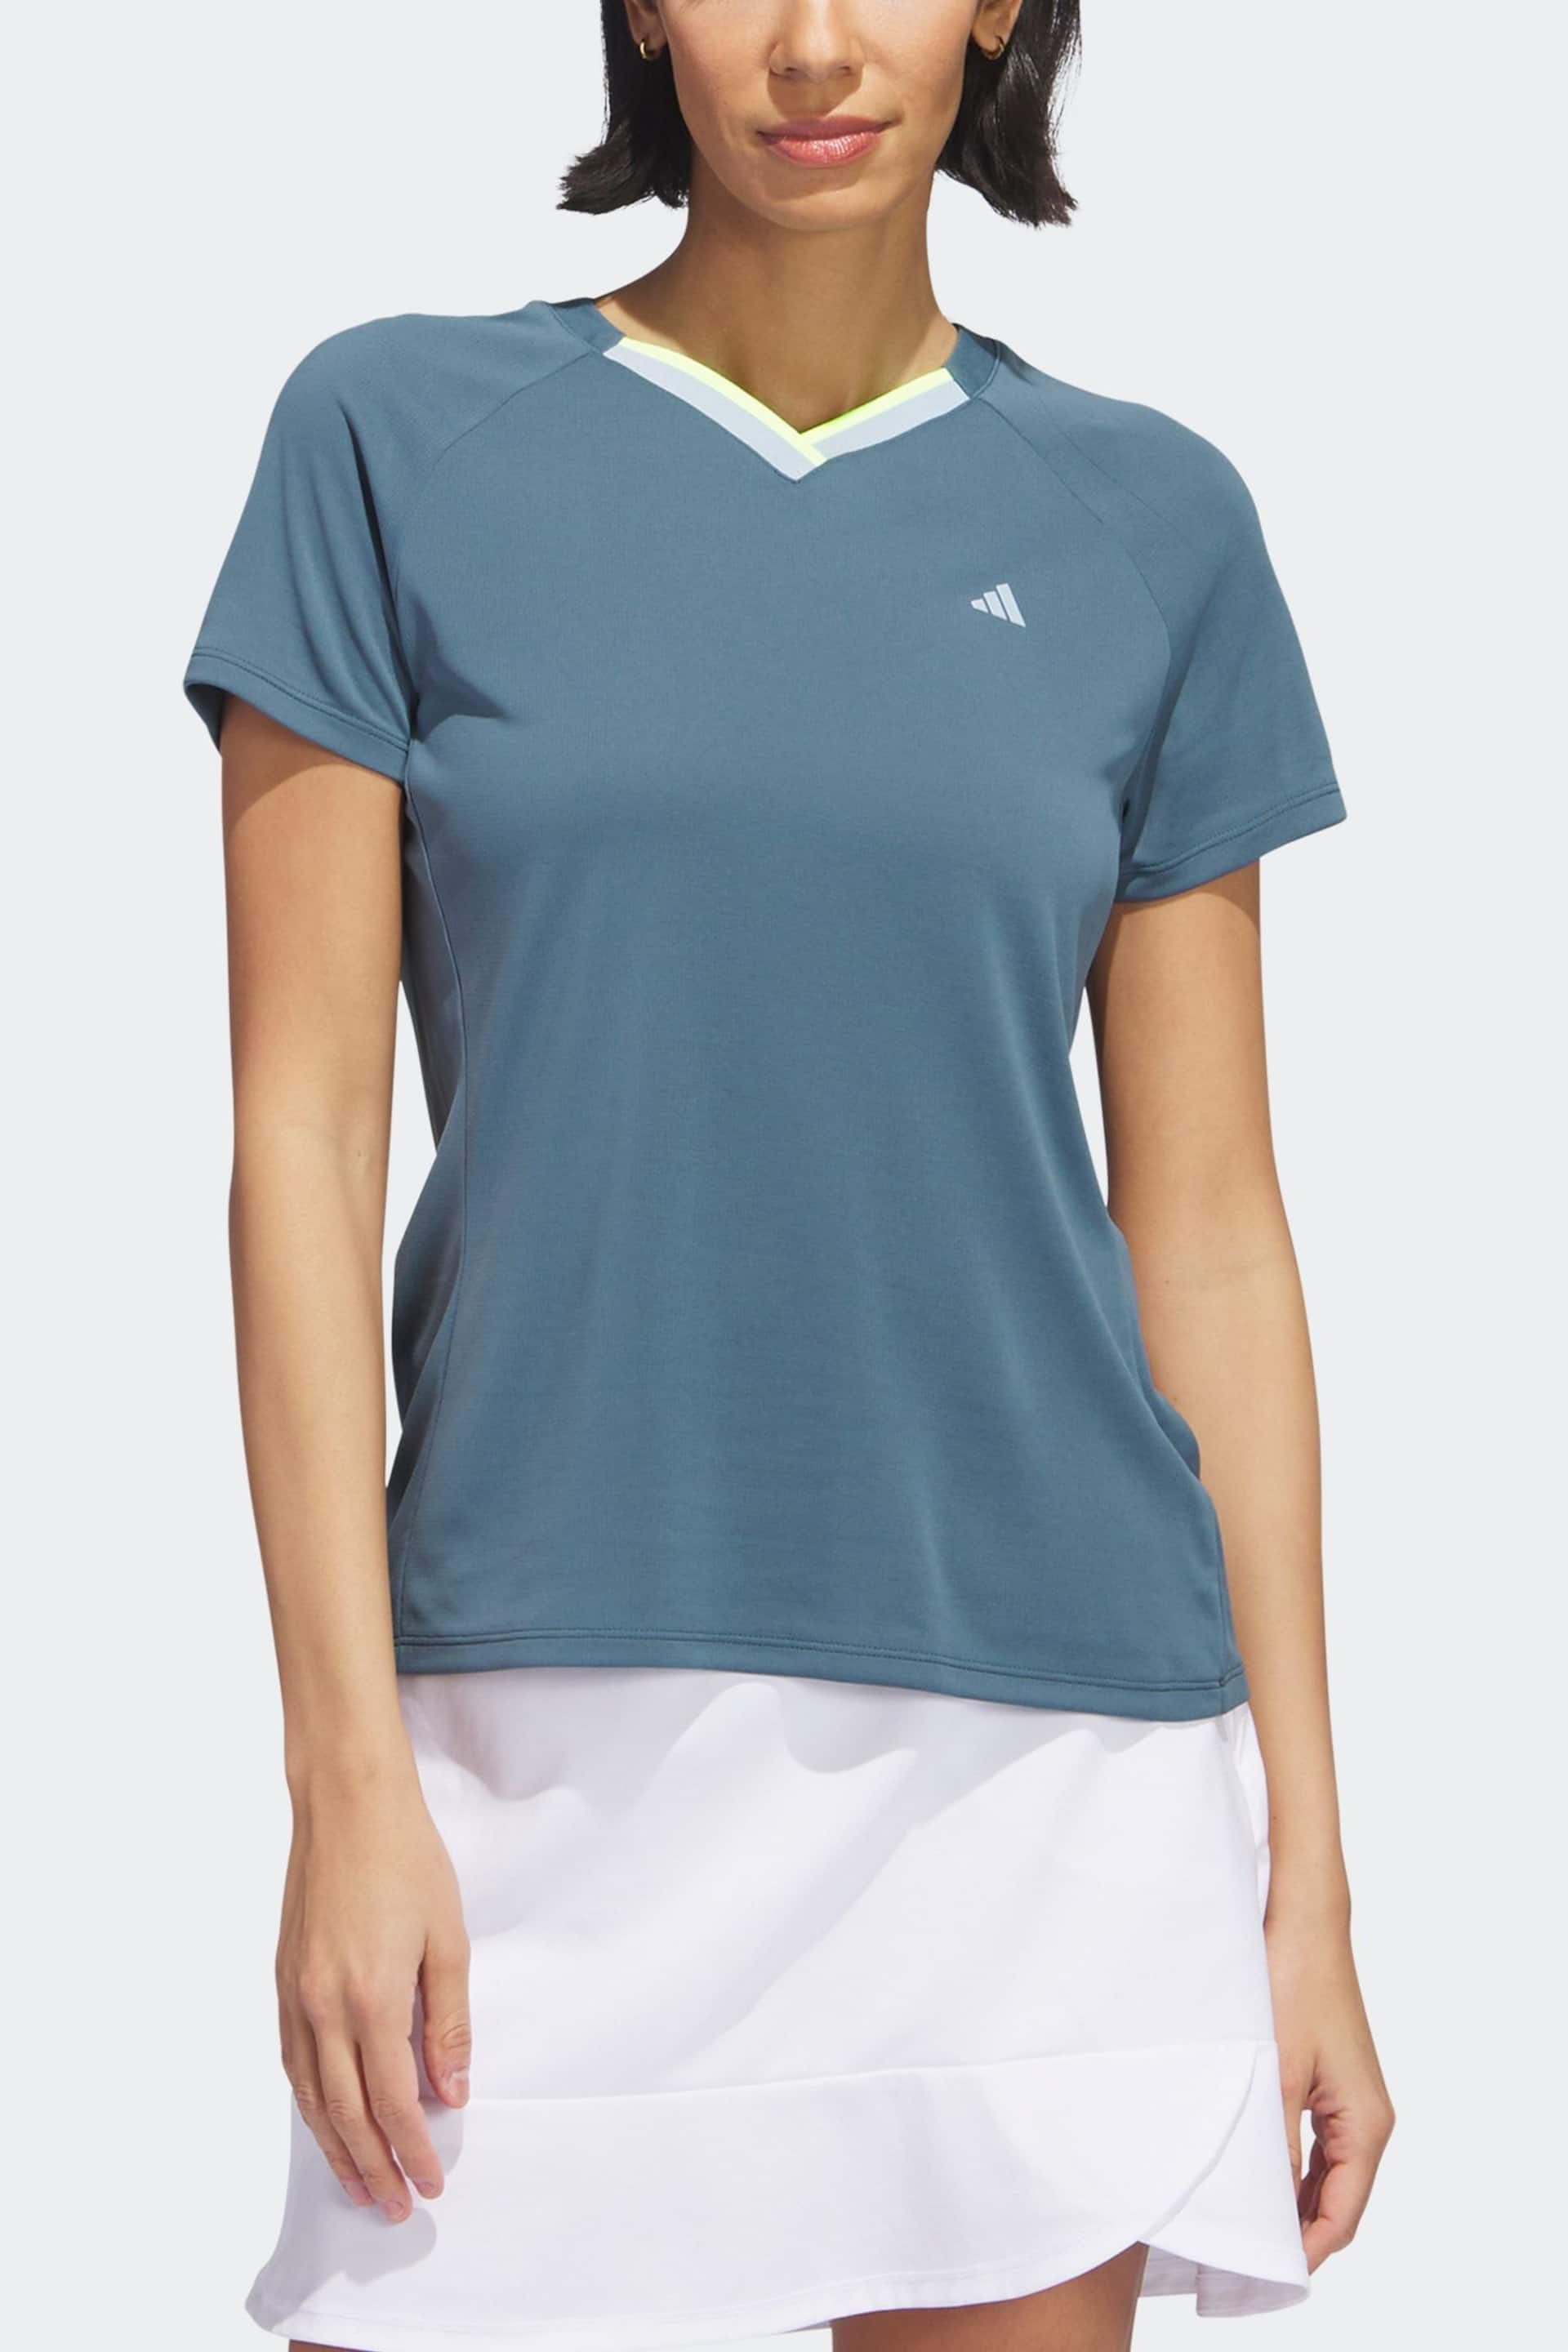 adidas Teal Blue Ultimate365 Tour Heat.rdy V-neck Top - Image 4 of 8